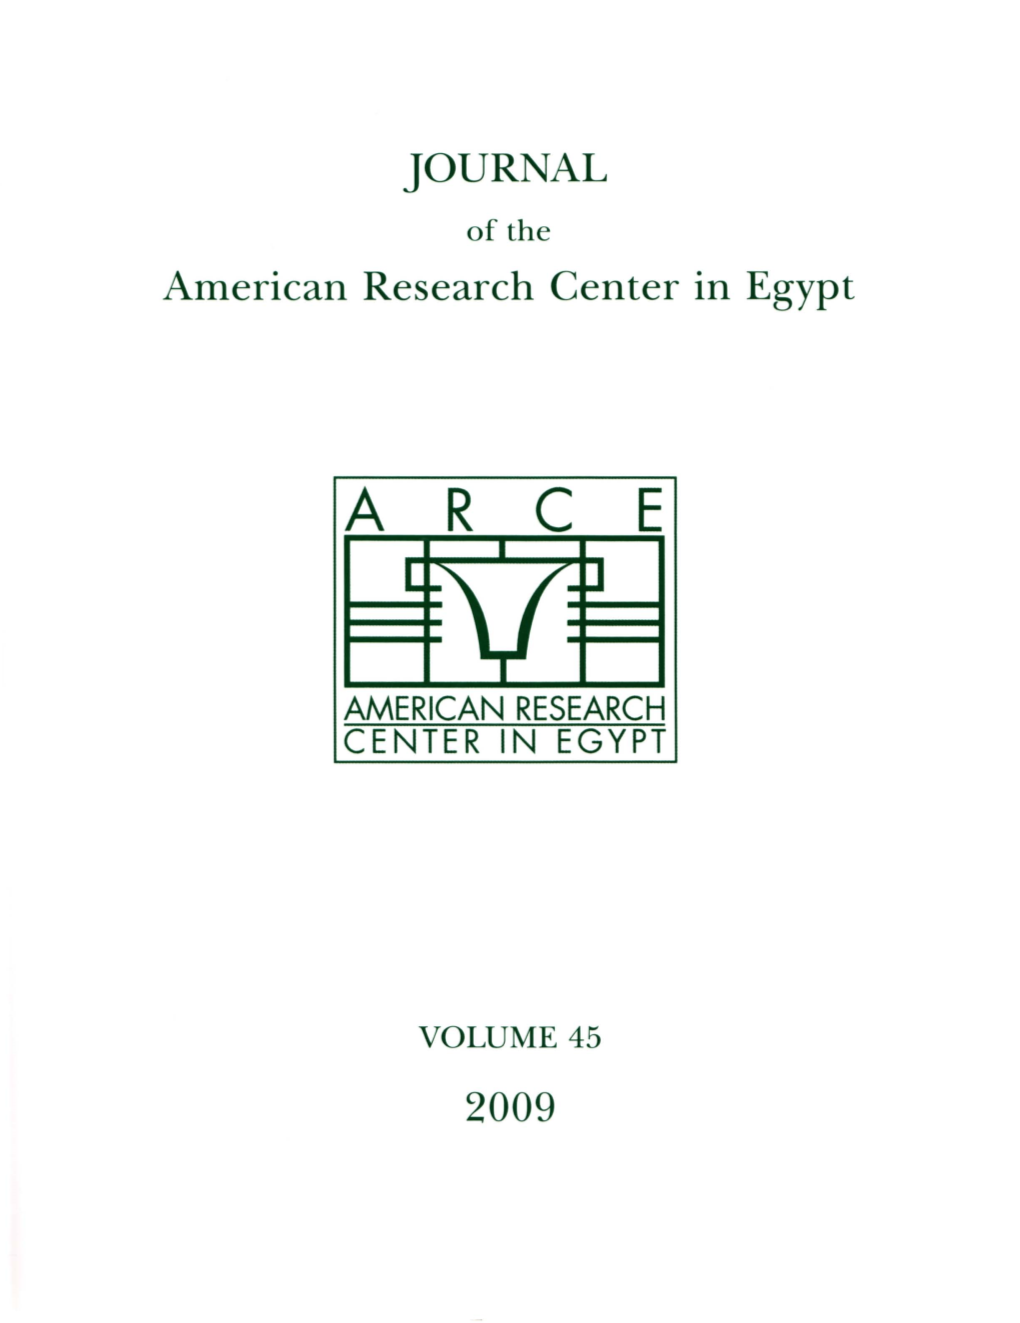 Journal of the American Research Center in Egypt, Vol. 45, 2009, Pgs